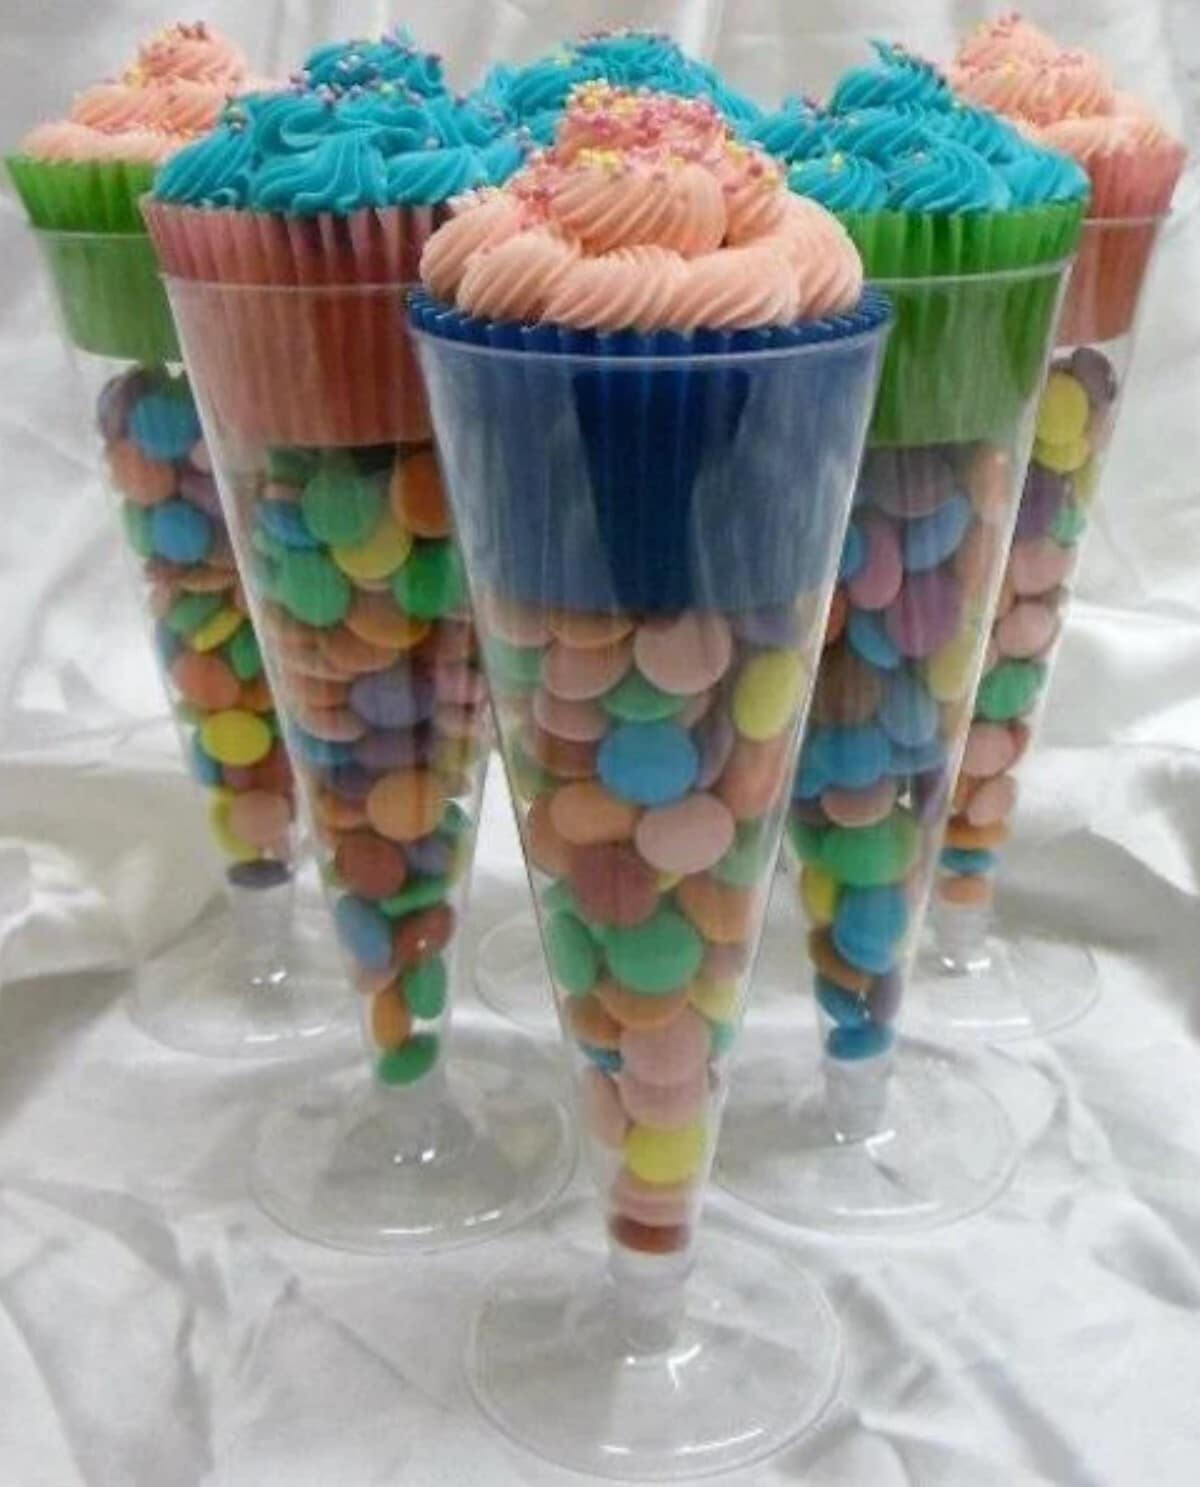 Cupcakes and candy in champagne plastic cups